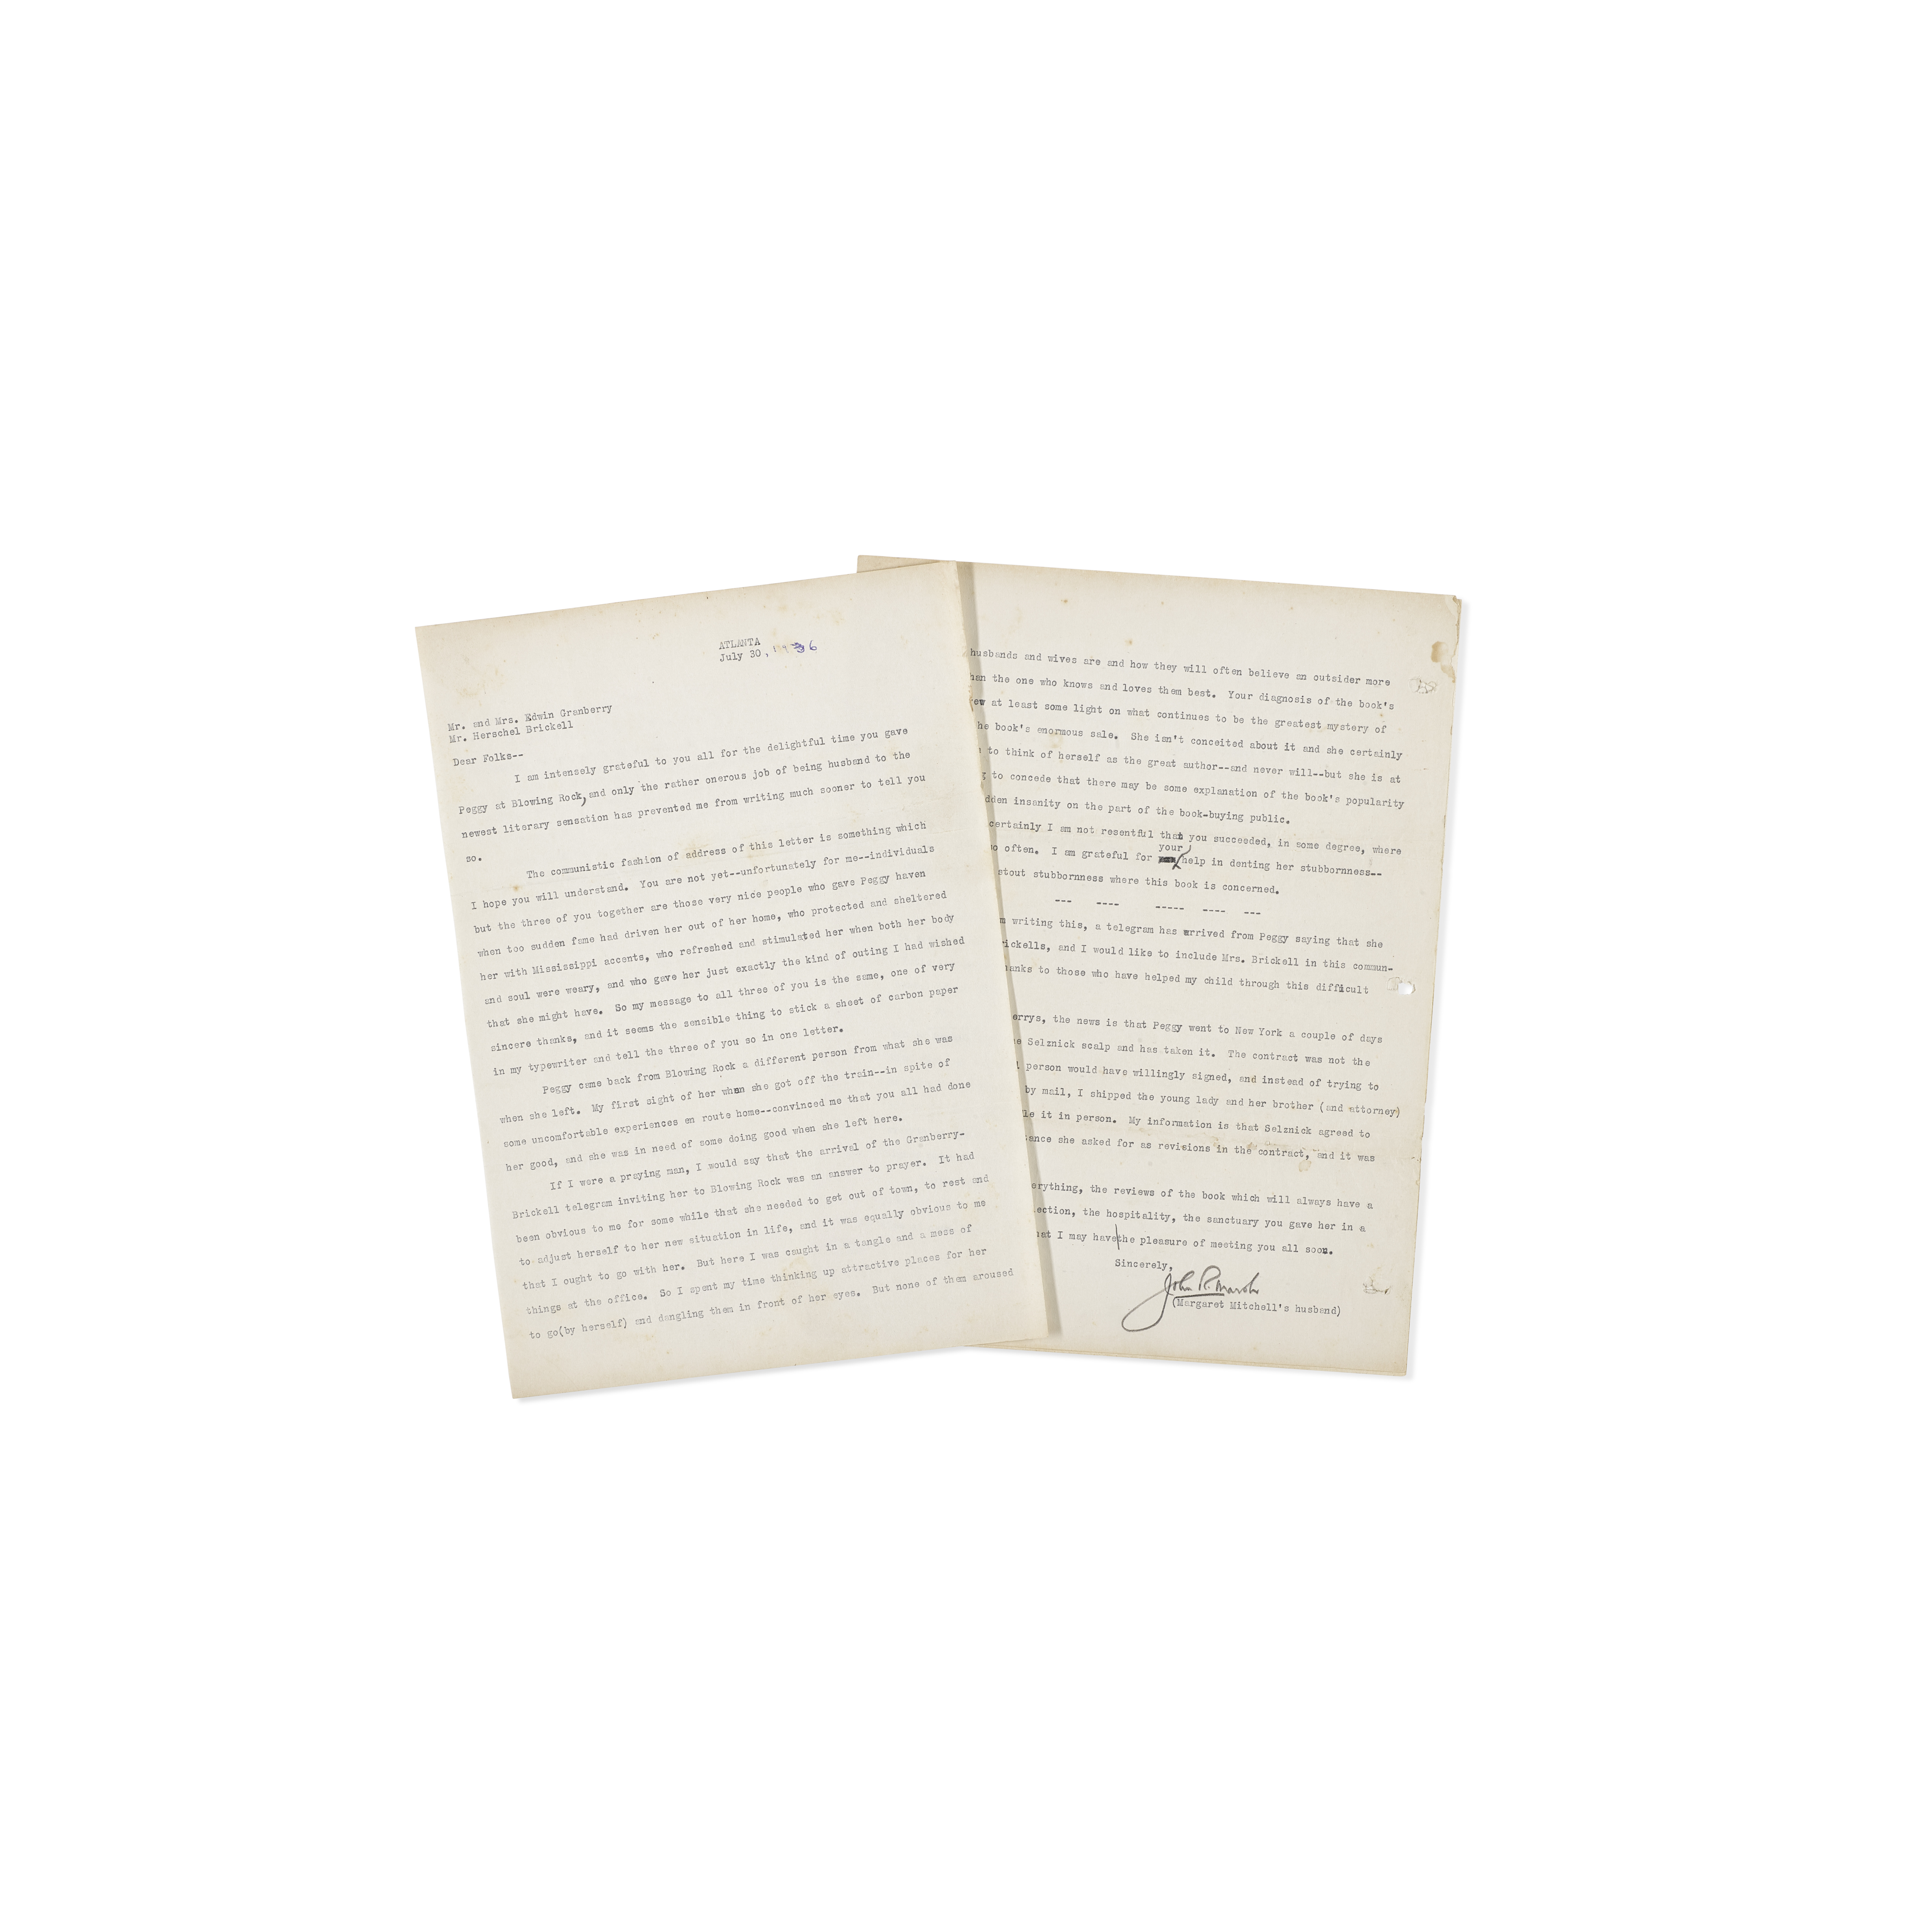 A John Marsh typed letter signed pertaining to Margaret Mitchell and Gone With the Wind